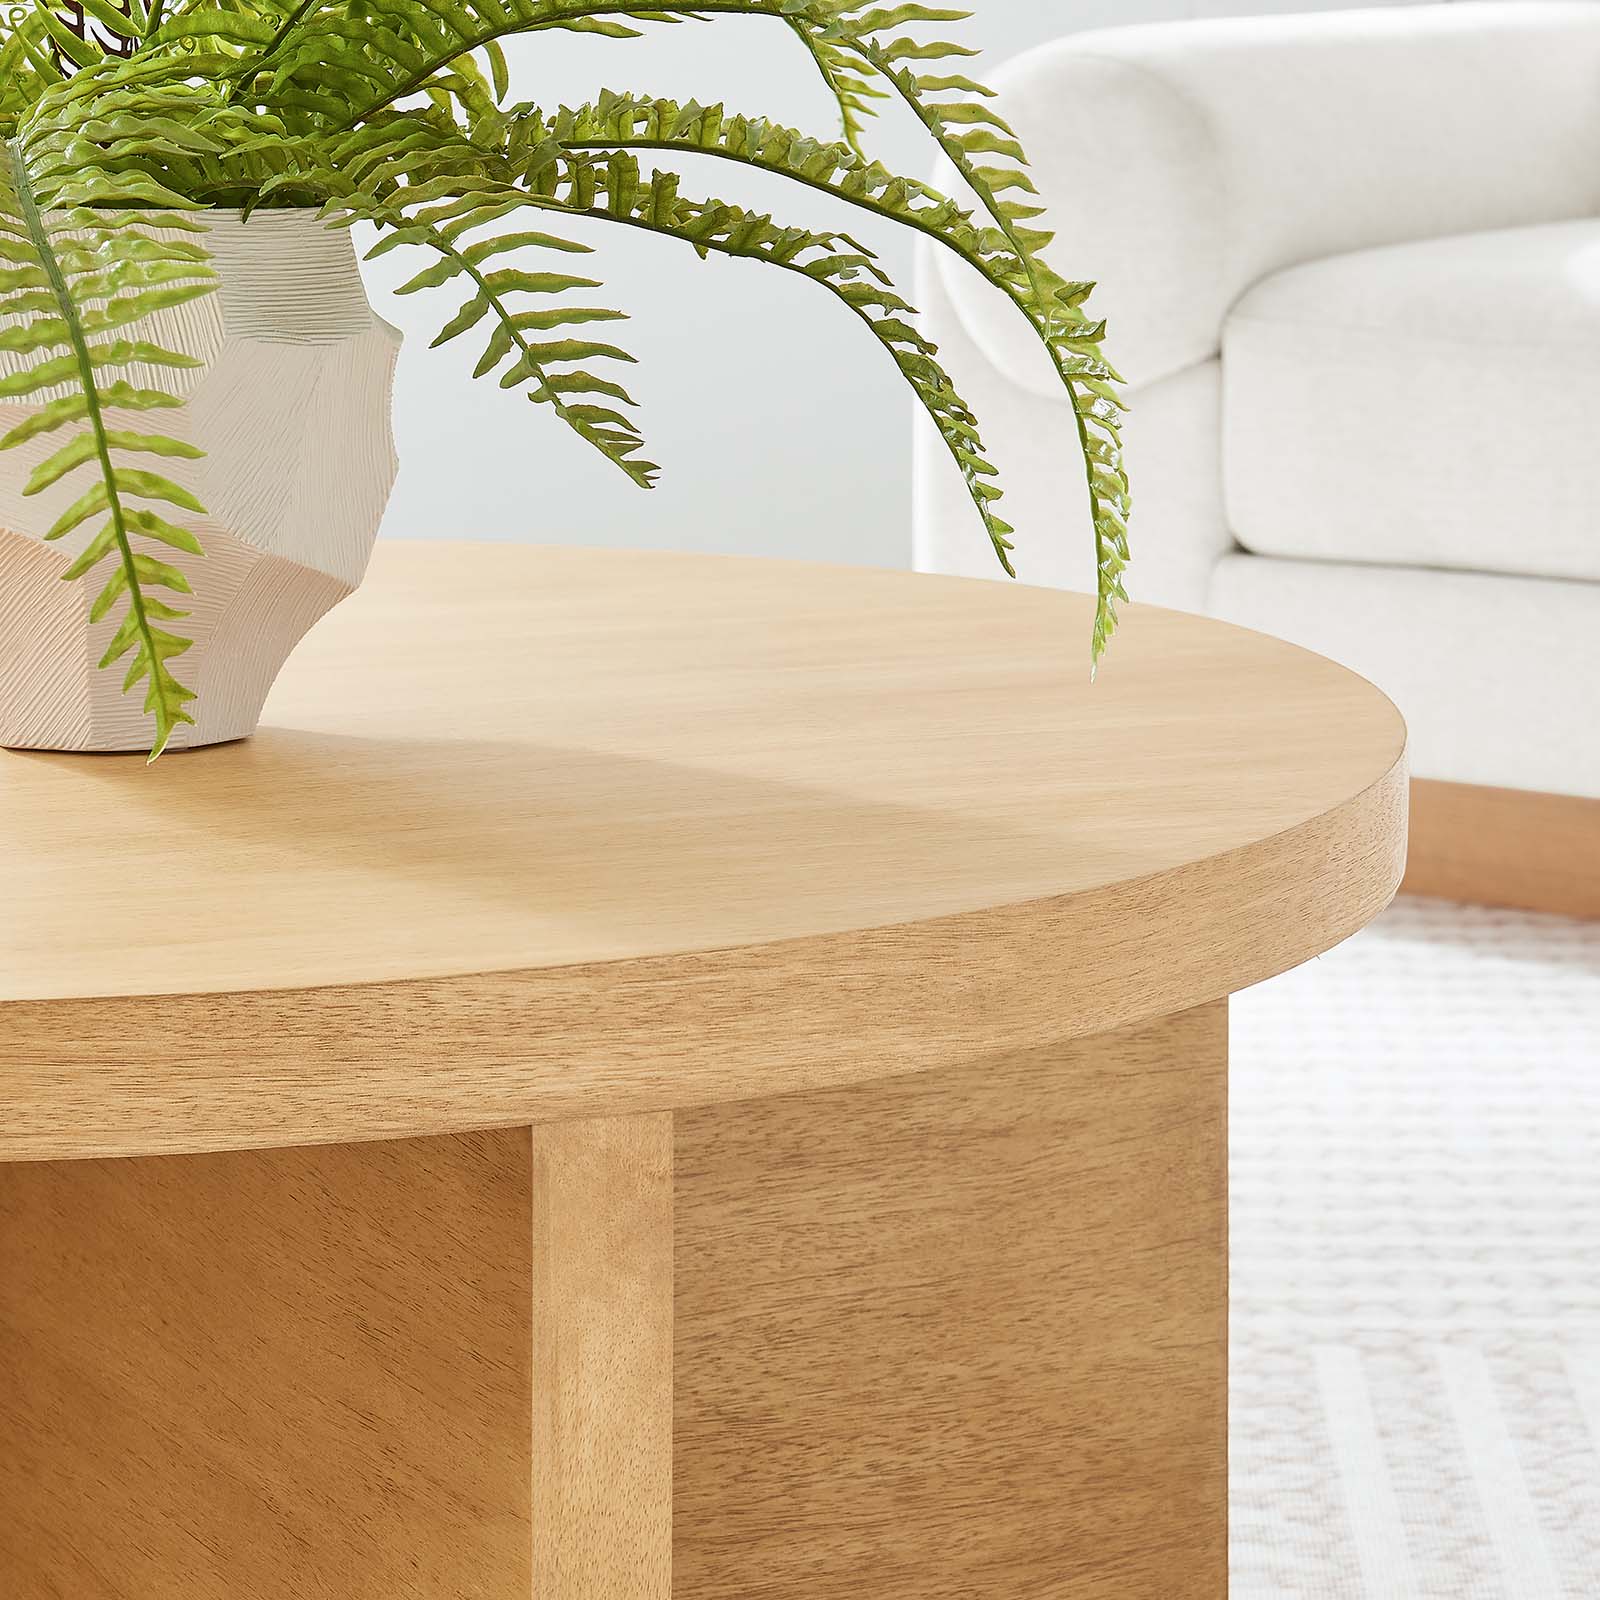 Silas Round Wood Coffee Table - East Shore Modern Home Furnishings